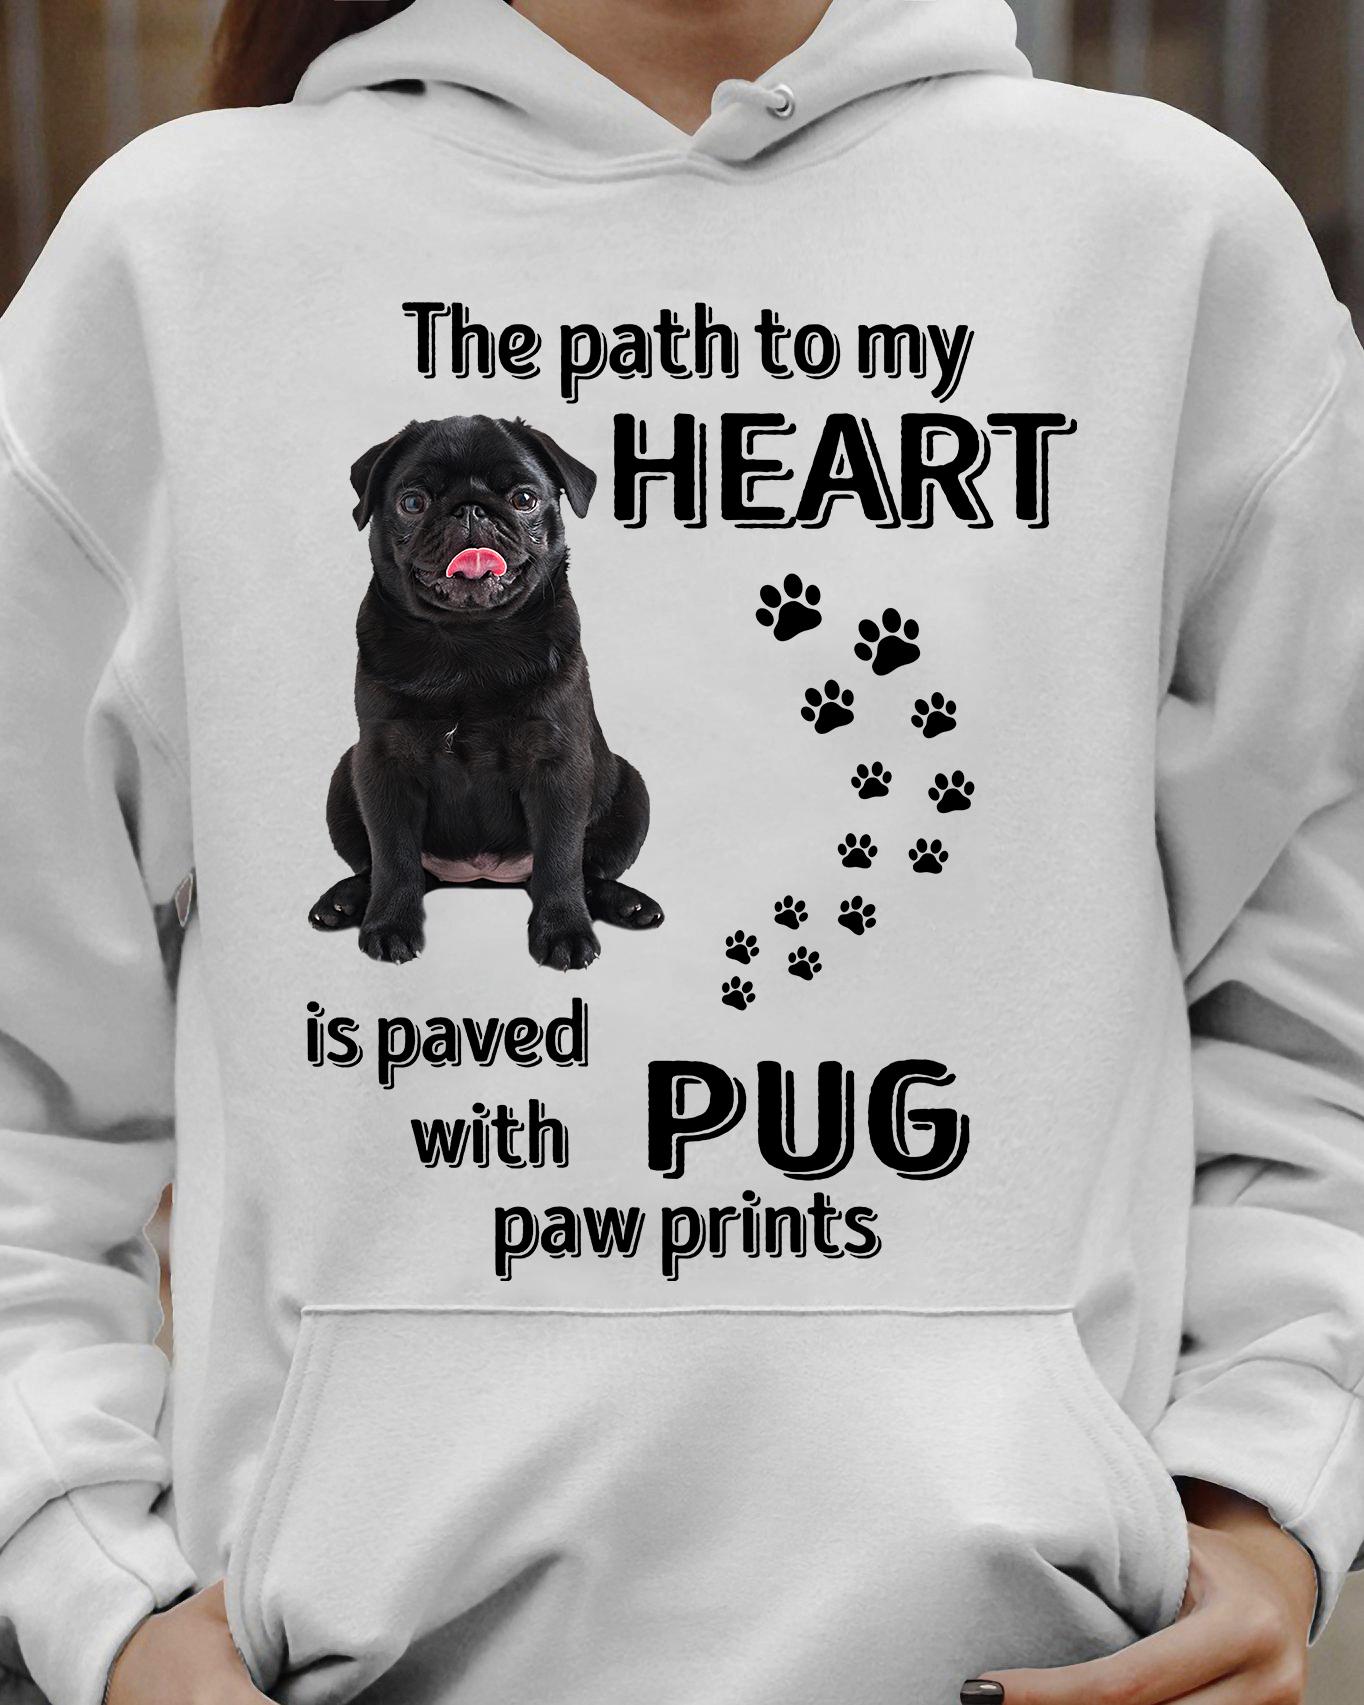 Pug Footprint - The path to my heart is paved with pug paw prints